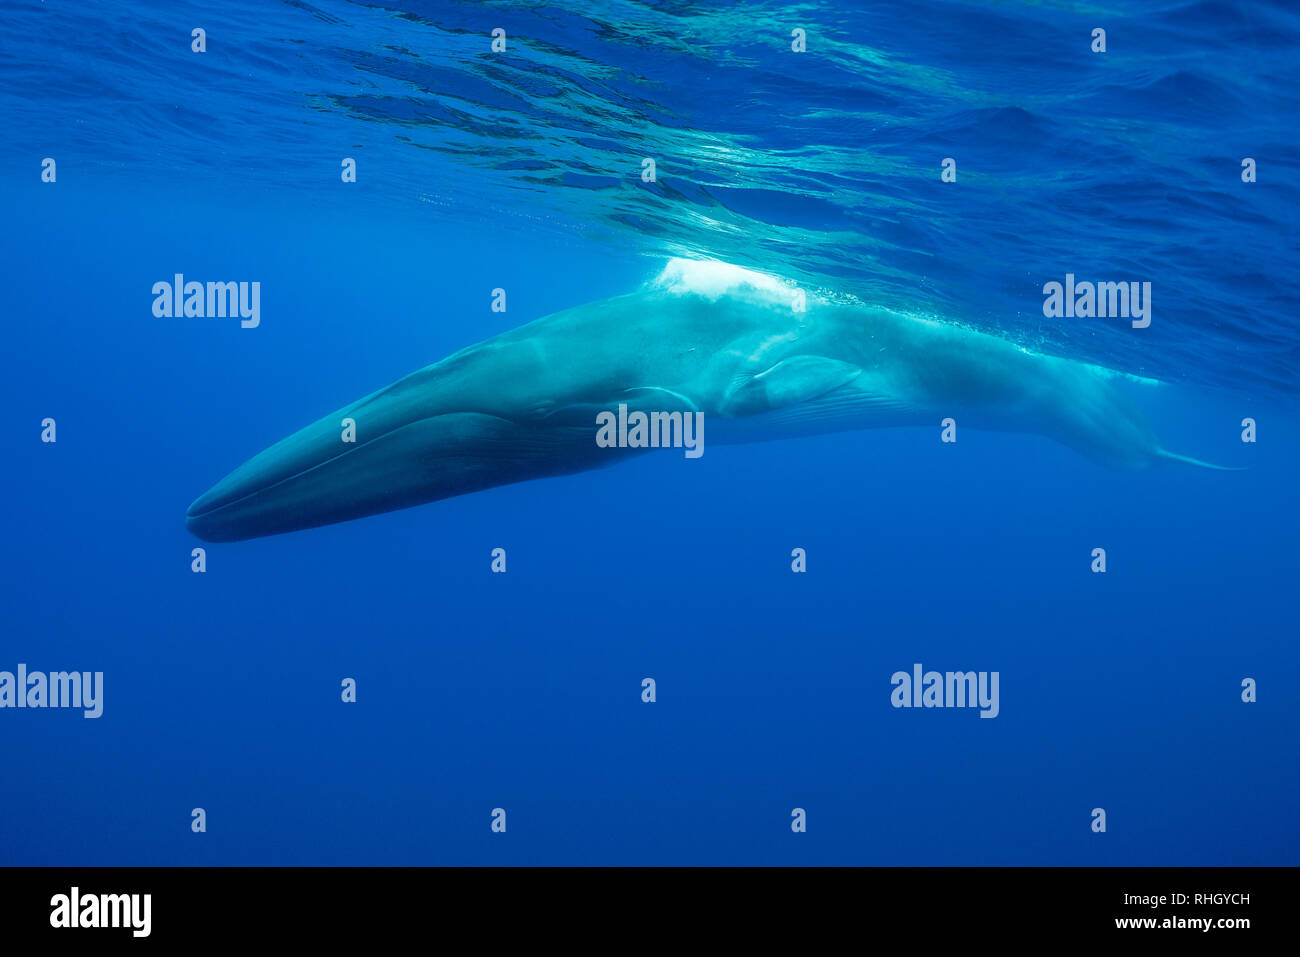 Fin whale, Balaenoptera physalus, underwater view, Atlantic Ocean, The Azores, Portugal. Stock Photo